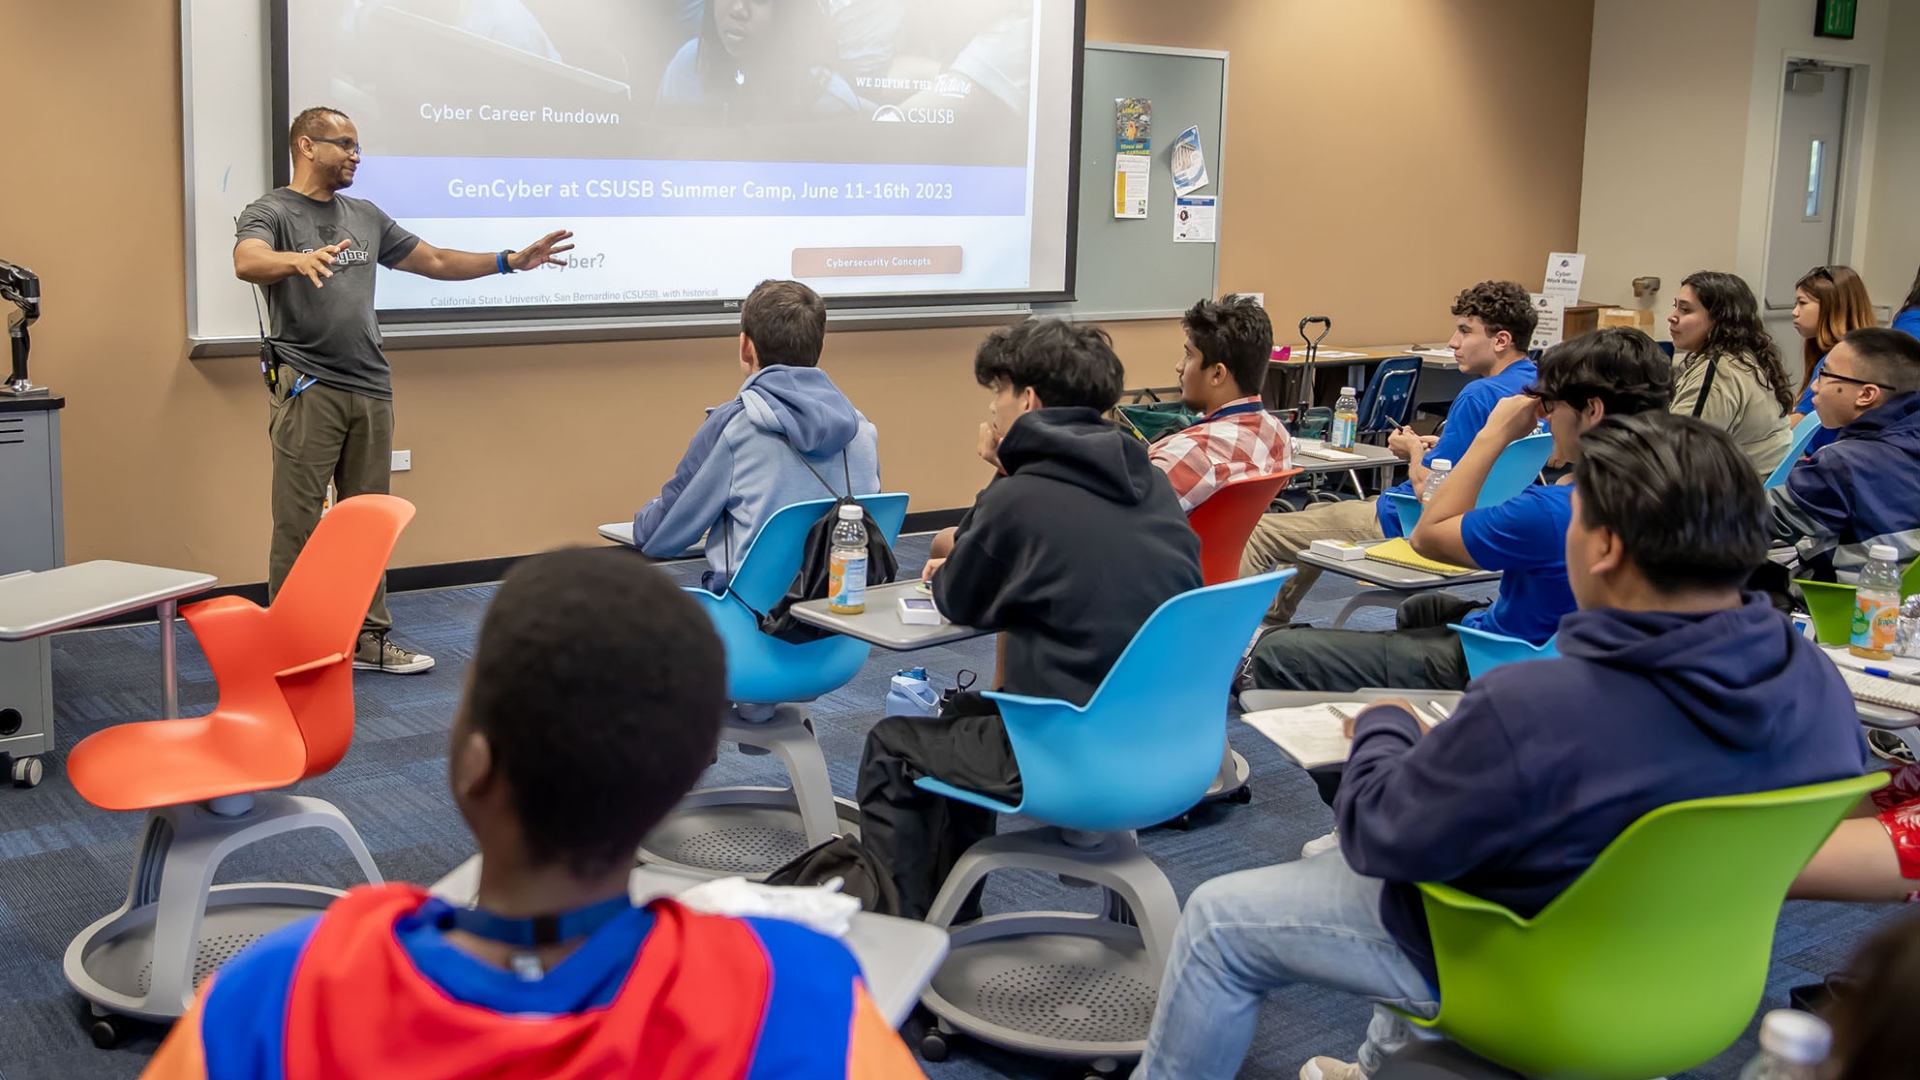 Charles Rouse, CSUSB GenCyber Camp program manager, speaks with the students about computer technology and cybersecurity at the Jack H. Brown College for Business and Public Administration at CSUSB.